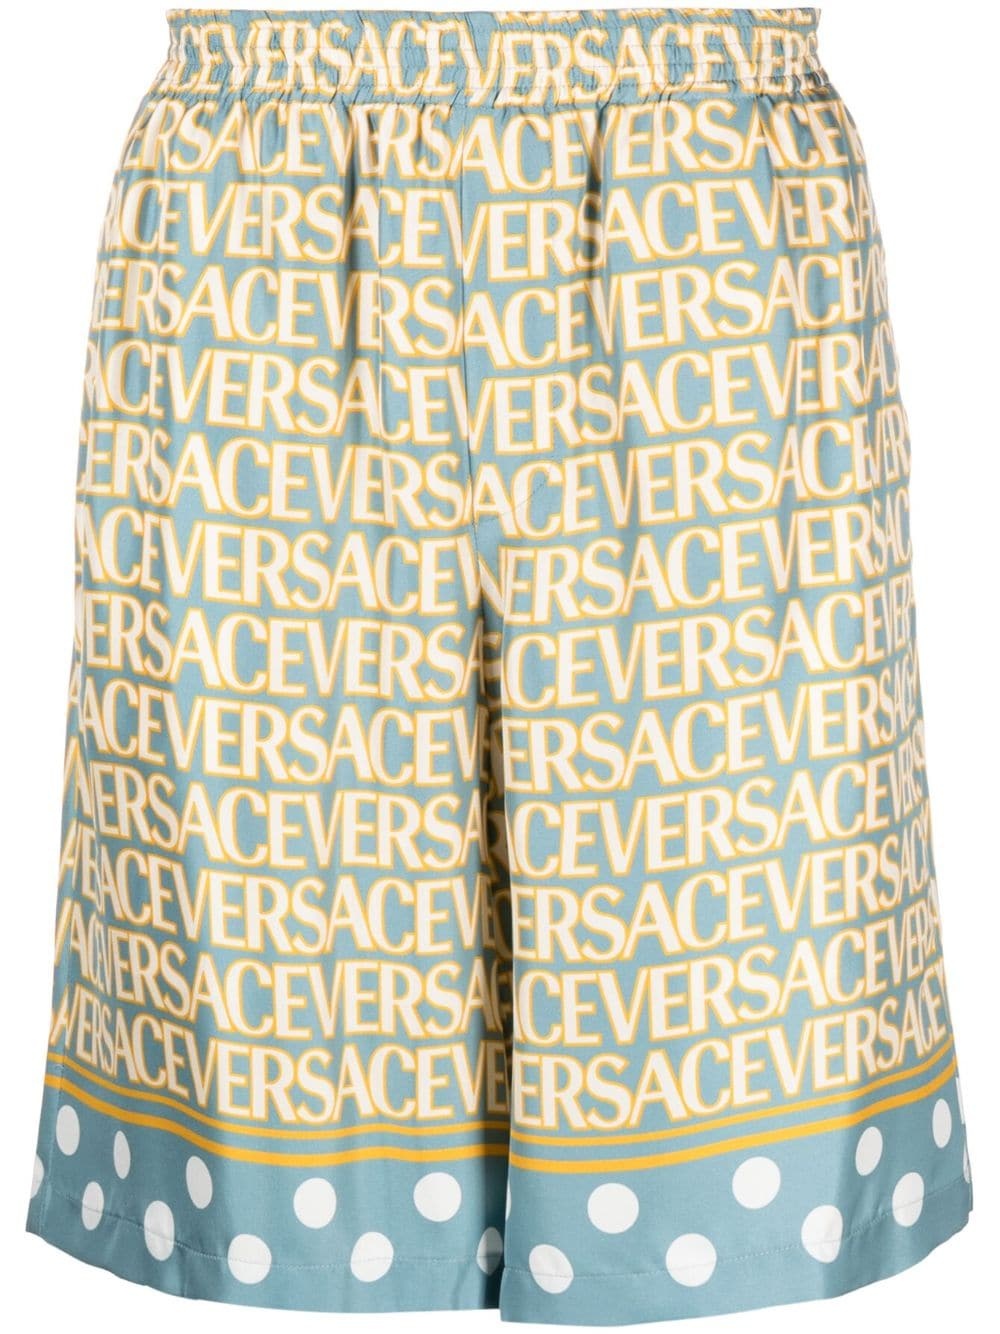 SHORTS SILK FABRIC WITH VERSACE ALL OVER PRINT - 4